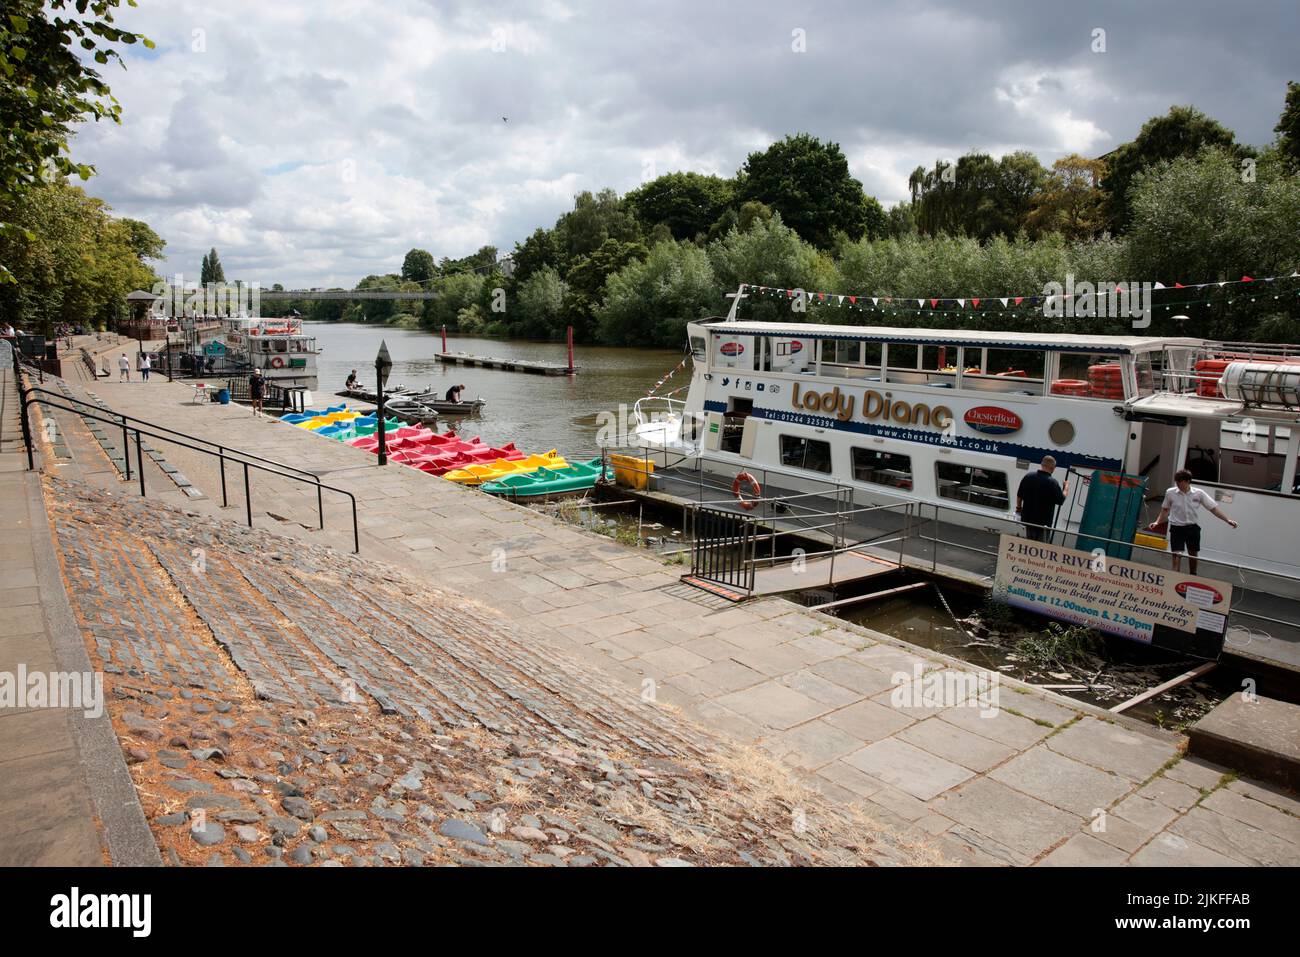 River cruise boat at The Groves on the River Dee at Chester, Chesire Stock Photo